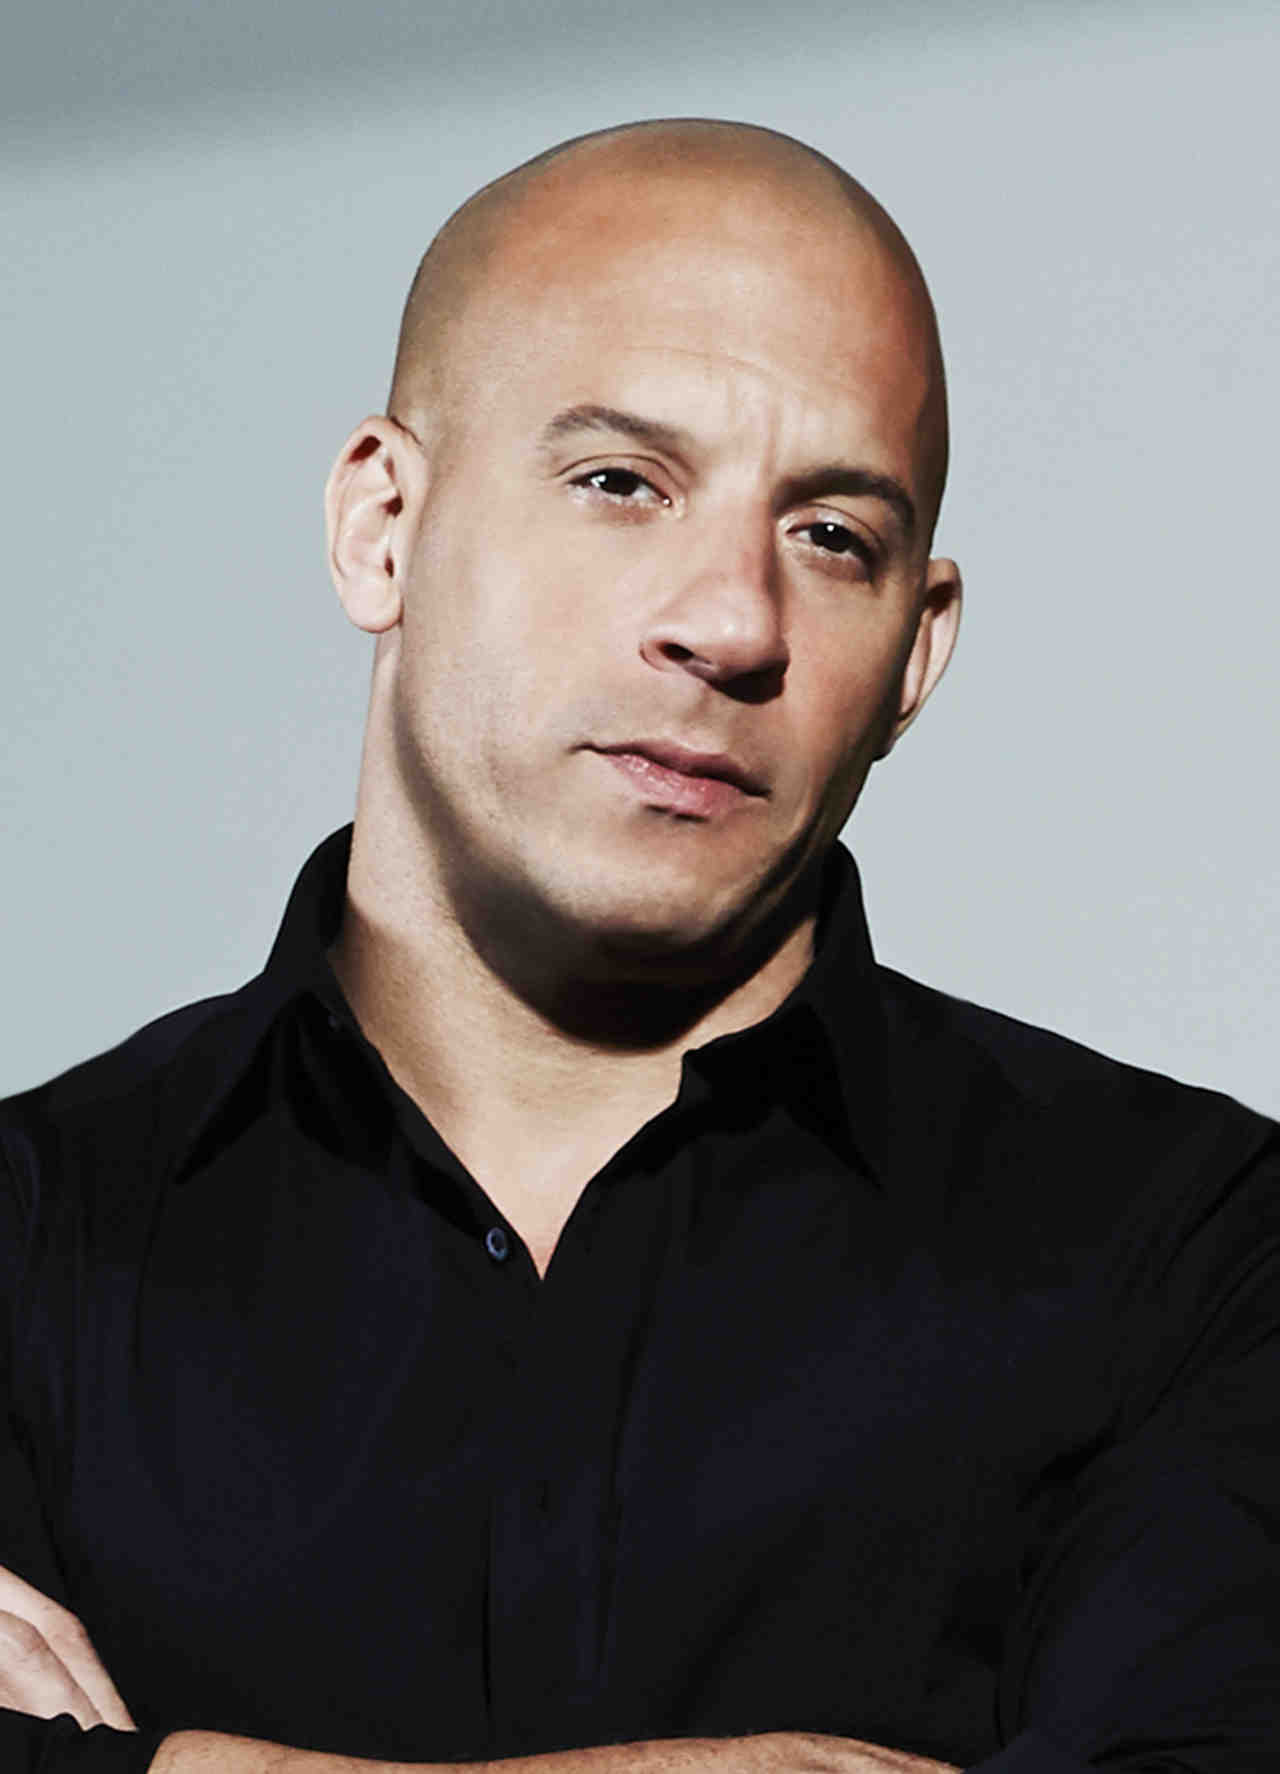 VIN DIESEL FACES SERIOUS ALLEGATIONS OF SEXUAL ASSAULT DURING FAST FIVE PRODUCTION